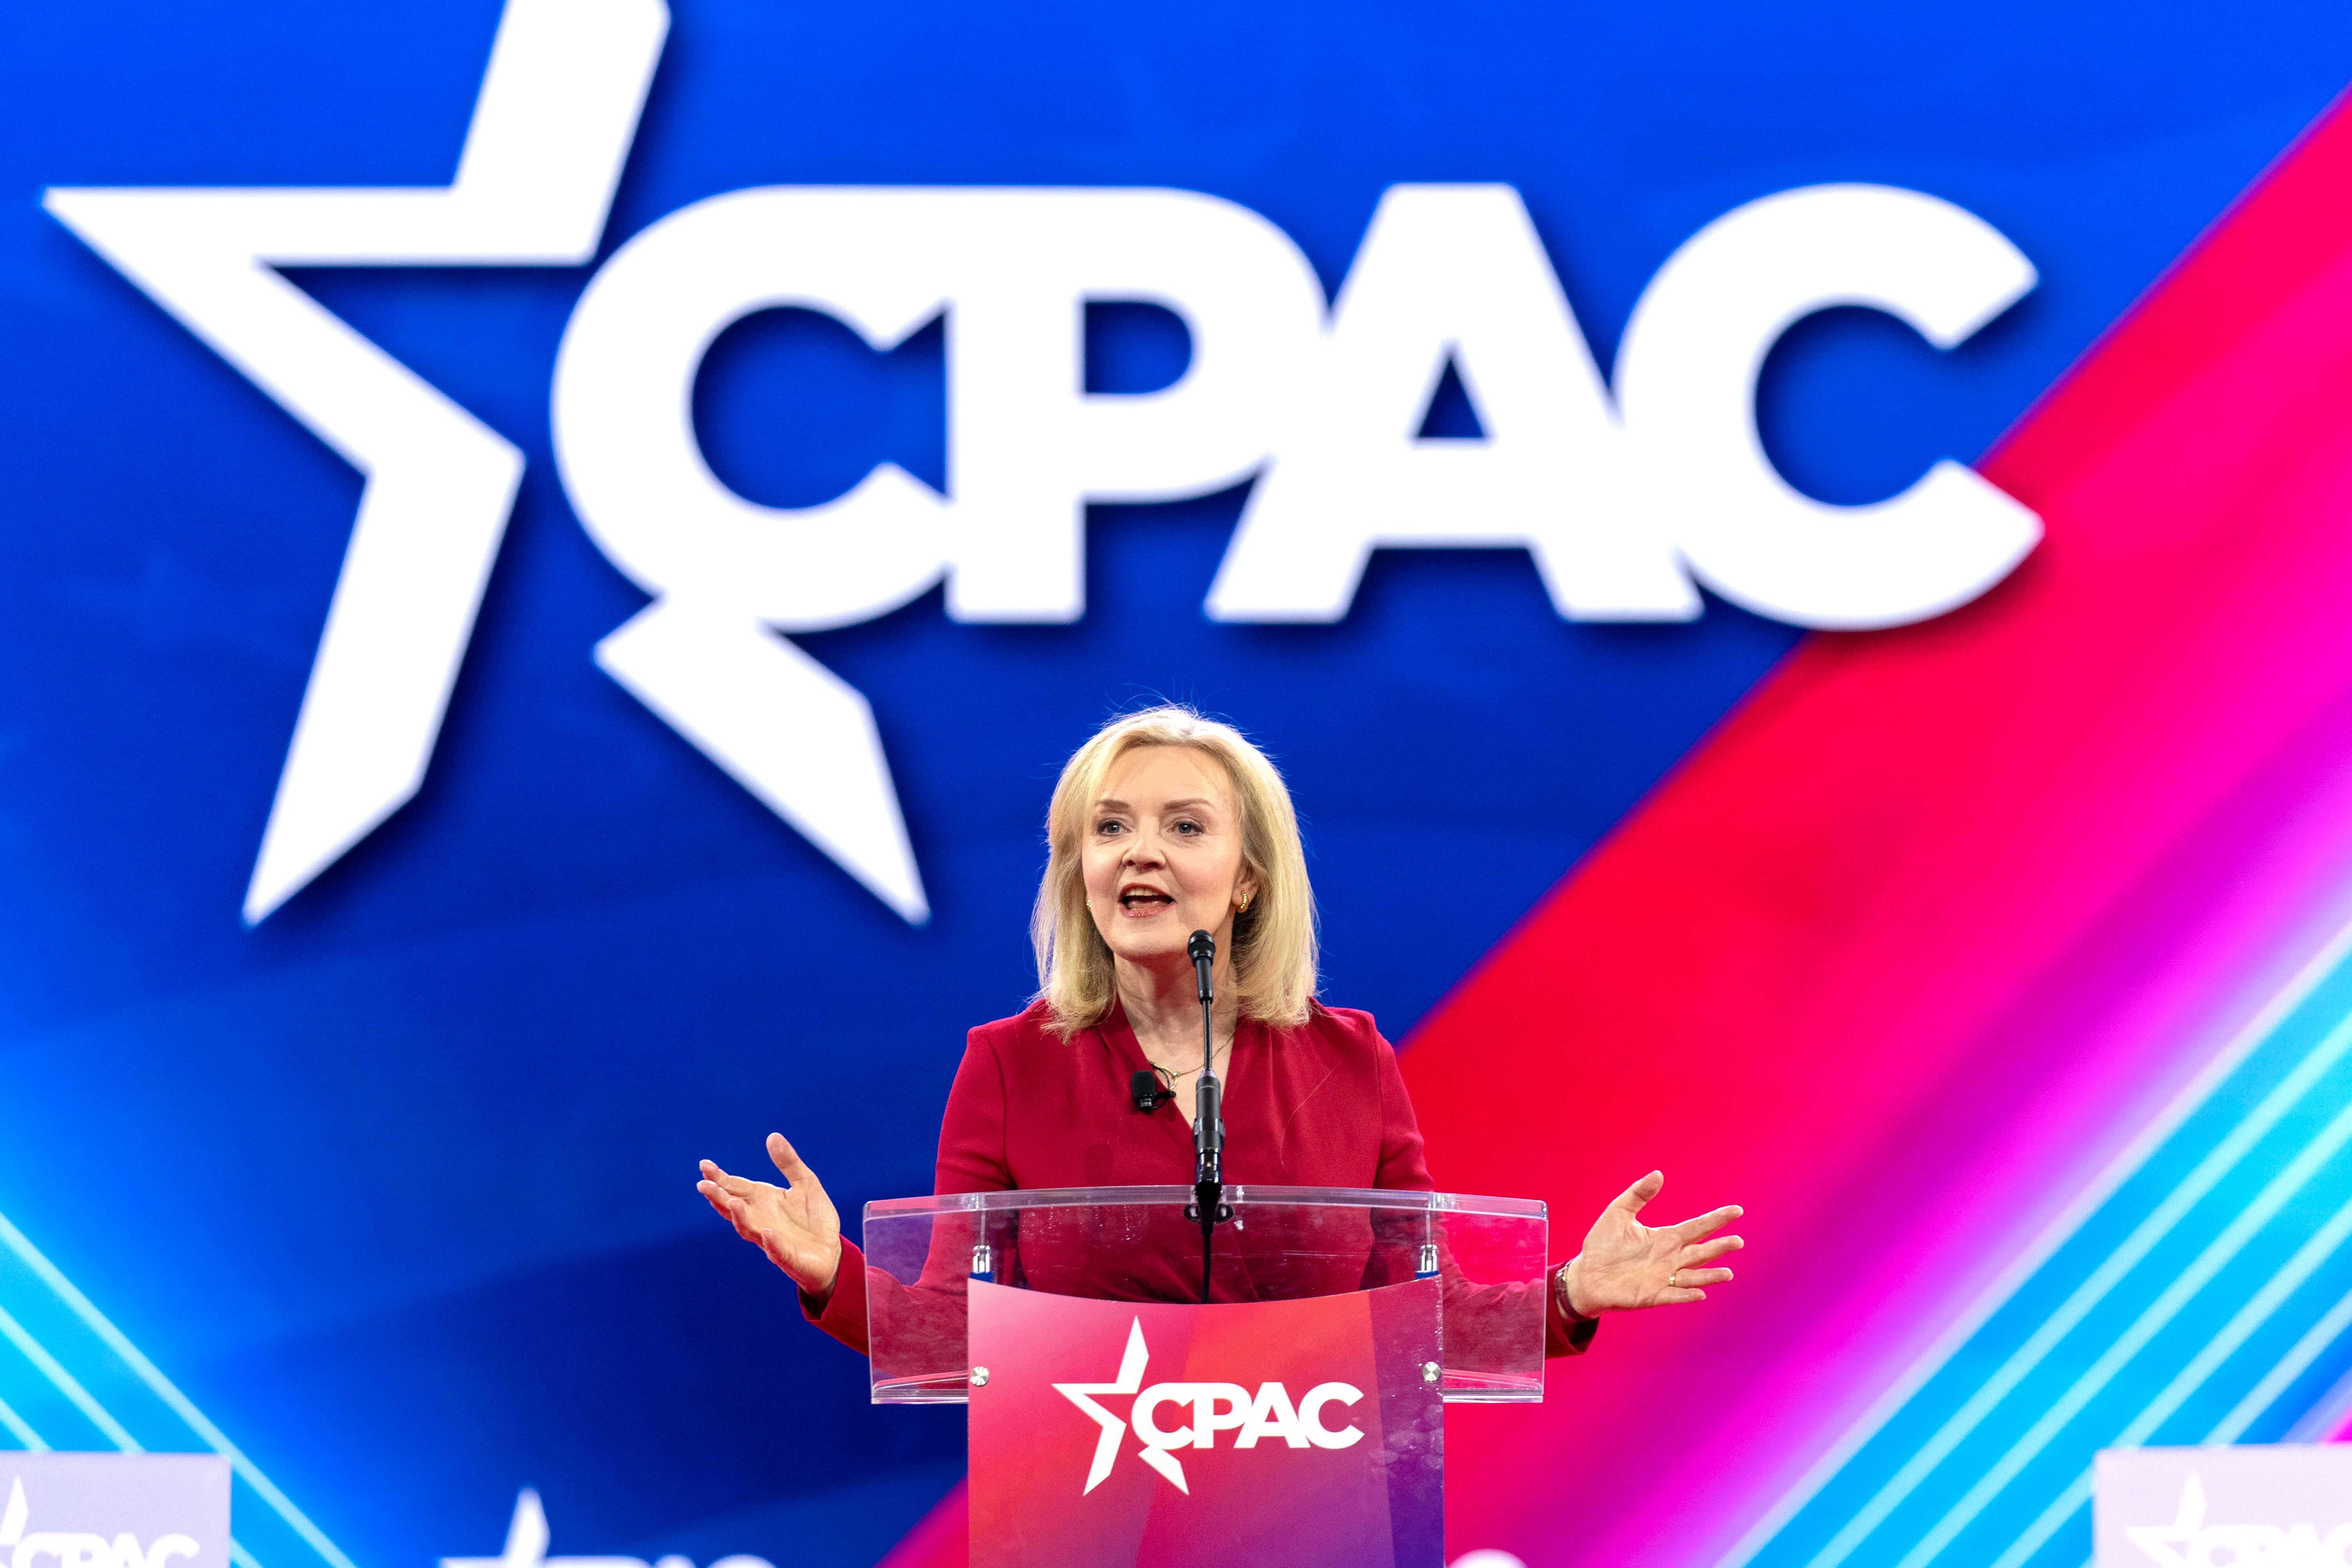 Former prime minister Liz Truss gives a speech at CPAC, Washington’s annual conservatives conference, where Trump will deliver the keynote this weekend